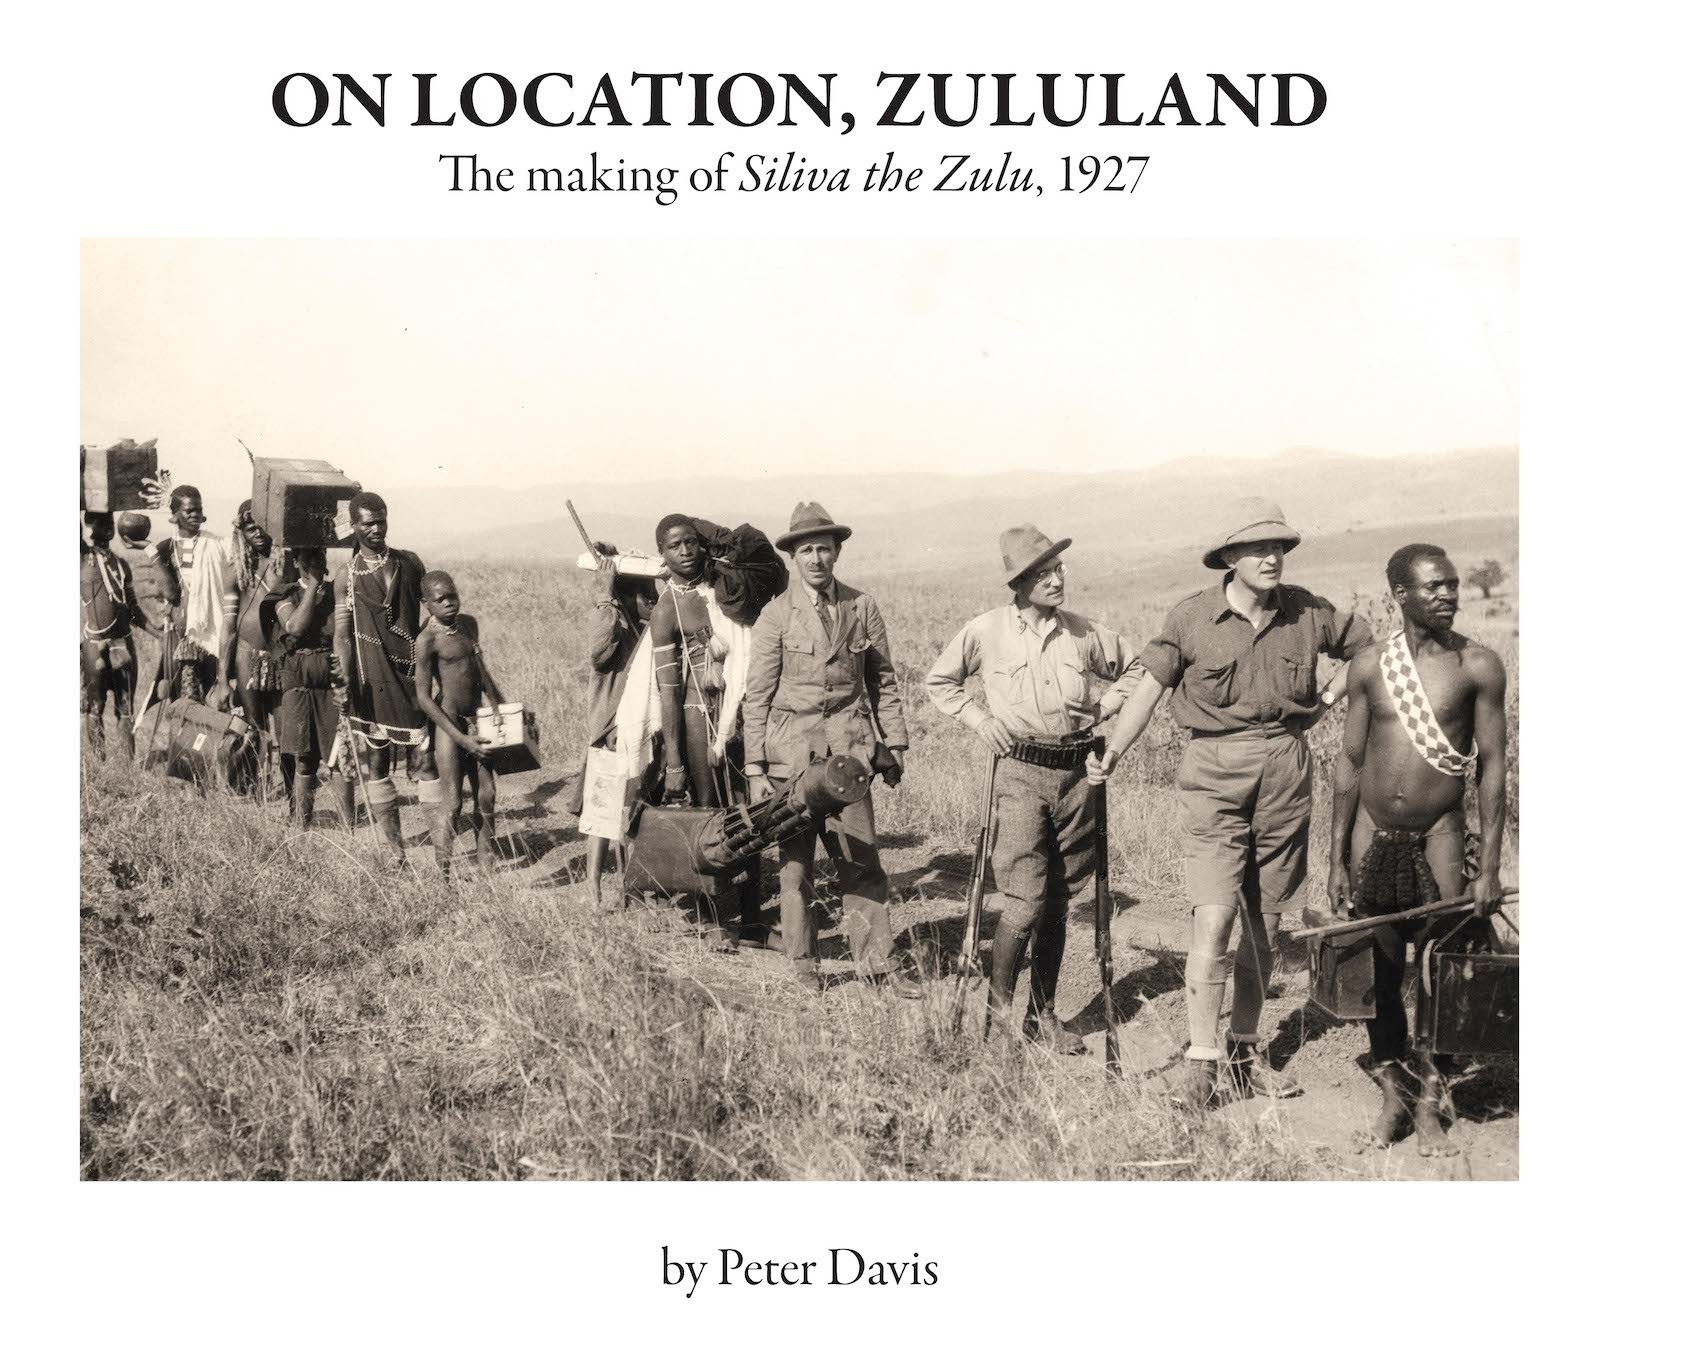 On Location, Zululand - The Making Of Siliva the Zulu - Book.